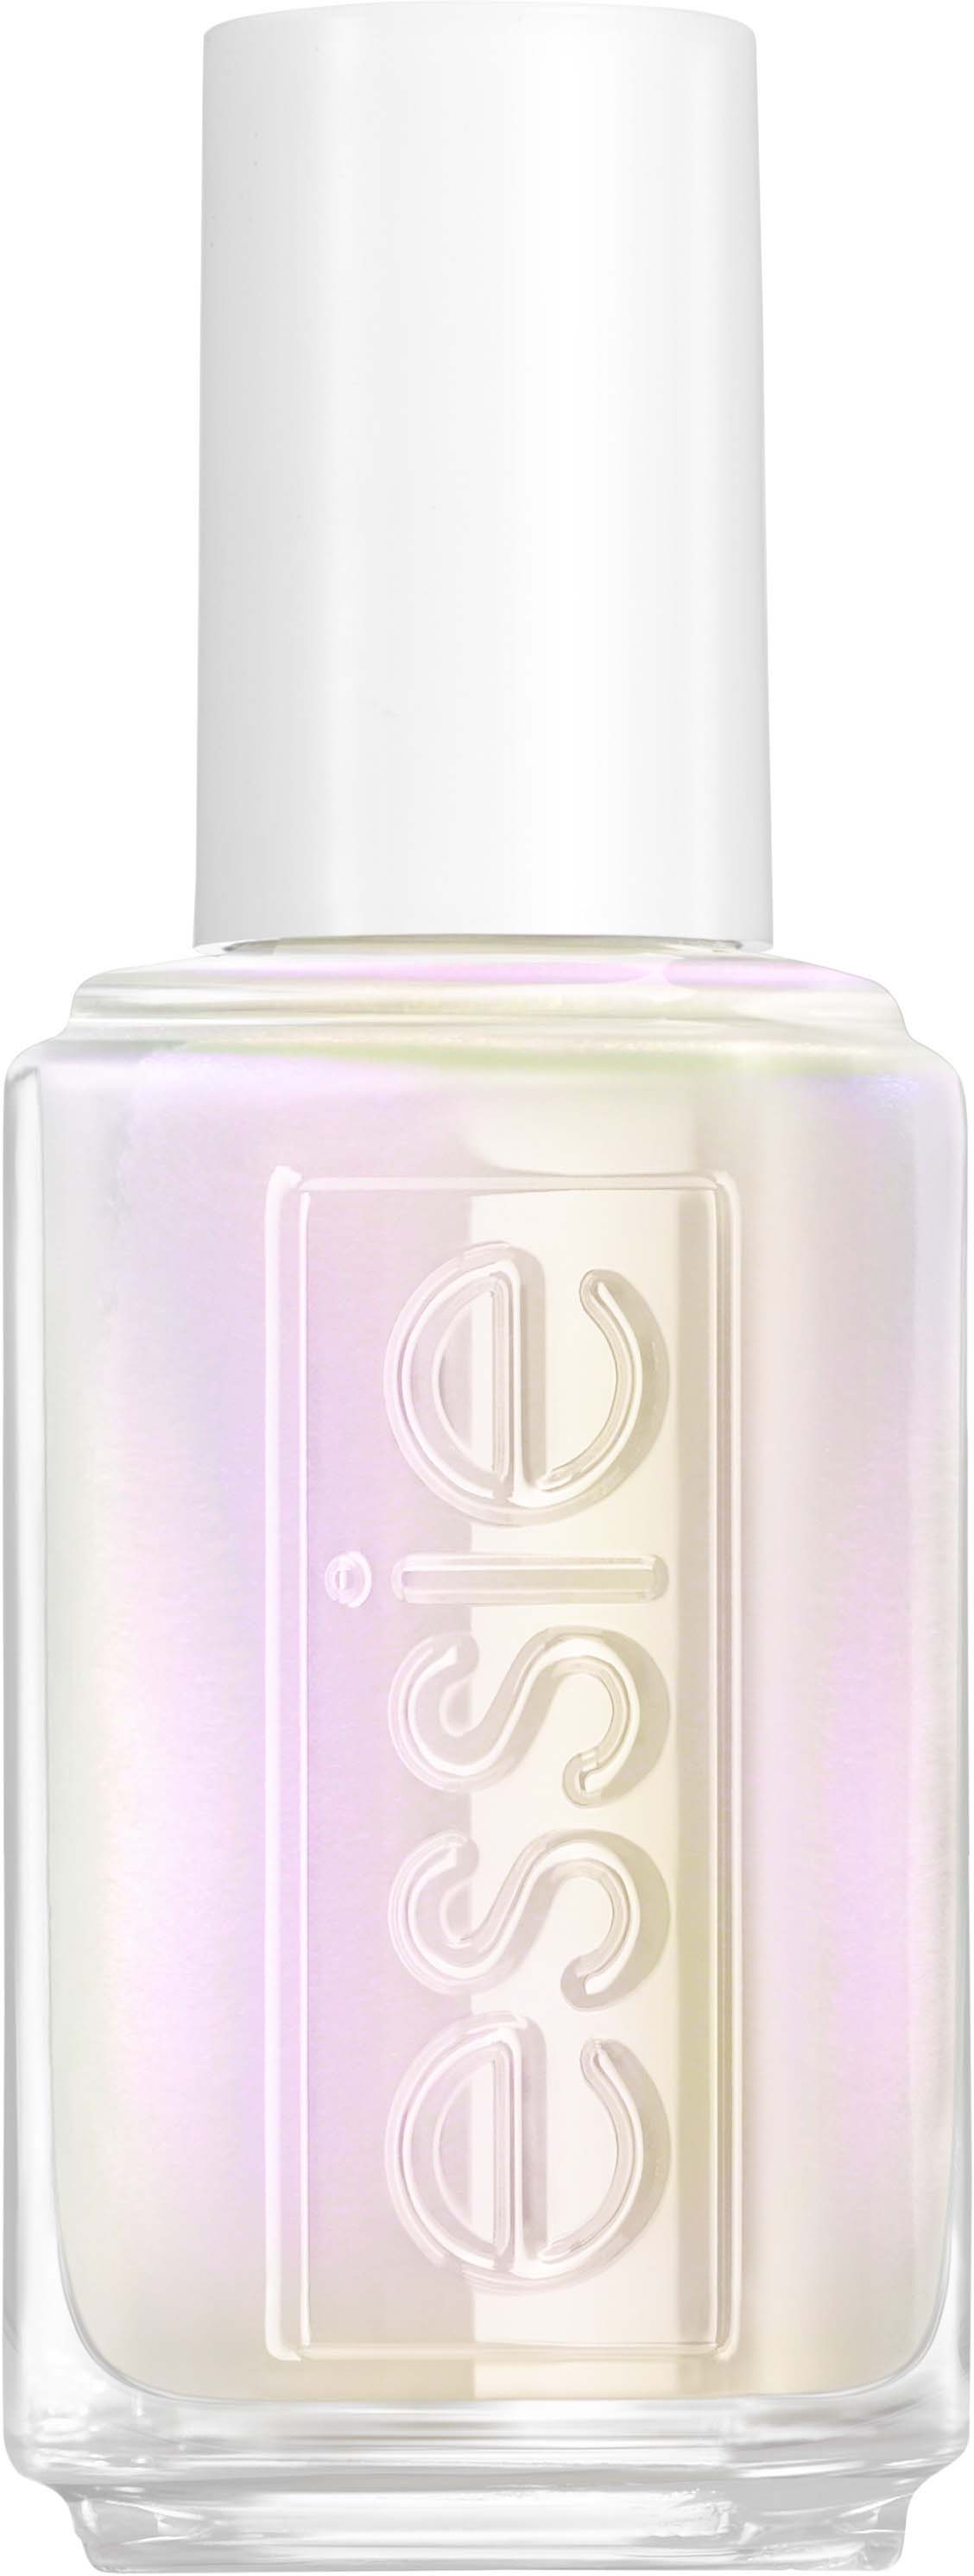 Filter Coat Iced 460 ml Nail 10 Essie FX Expressie Out Top